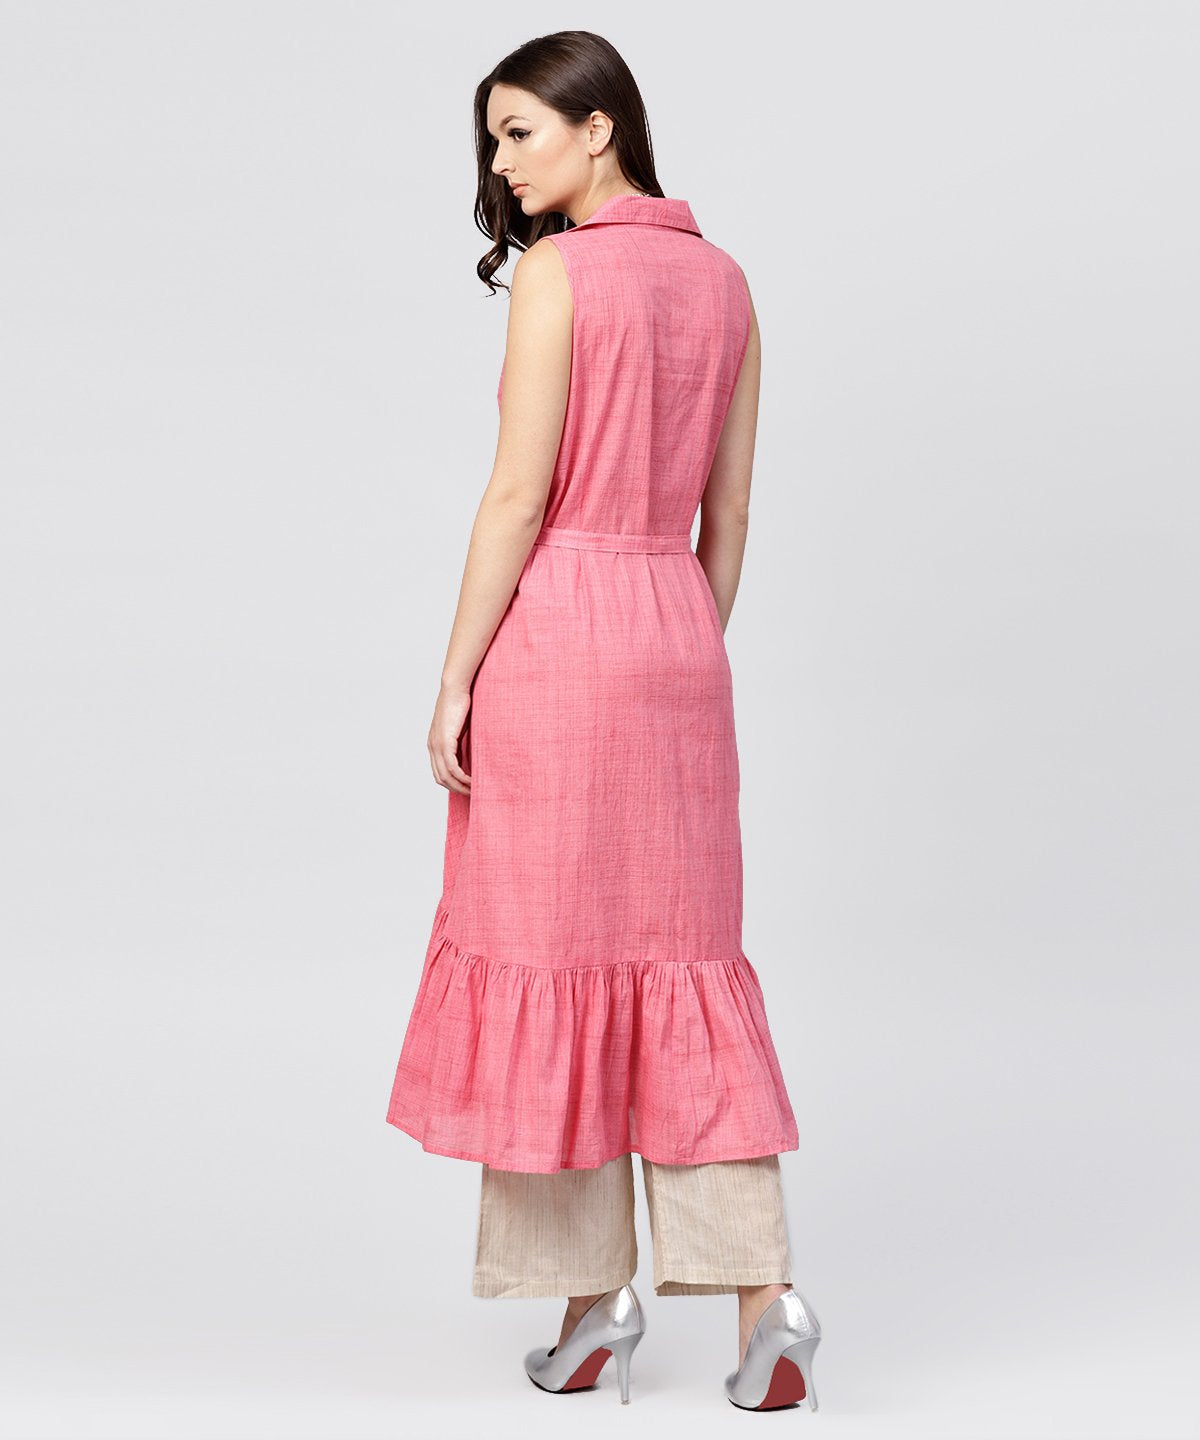 Women's Pink Cotton Tiered Dress With Shirt Collar And Front Packet - Nayo Clothing